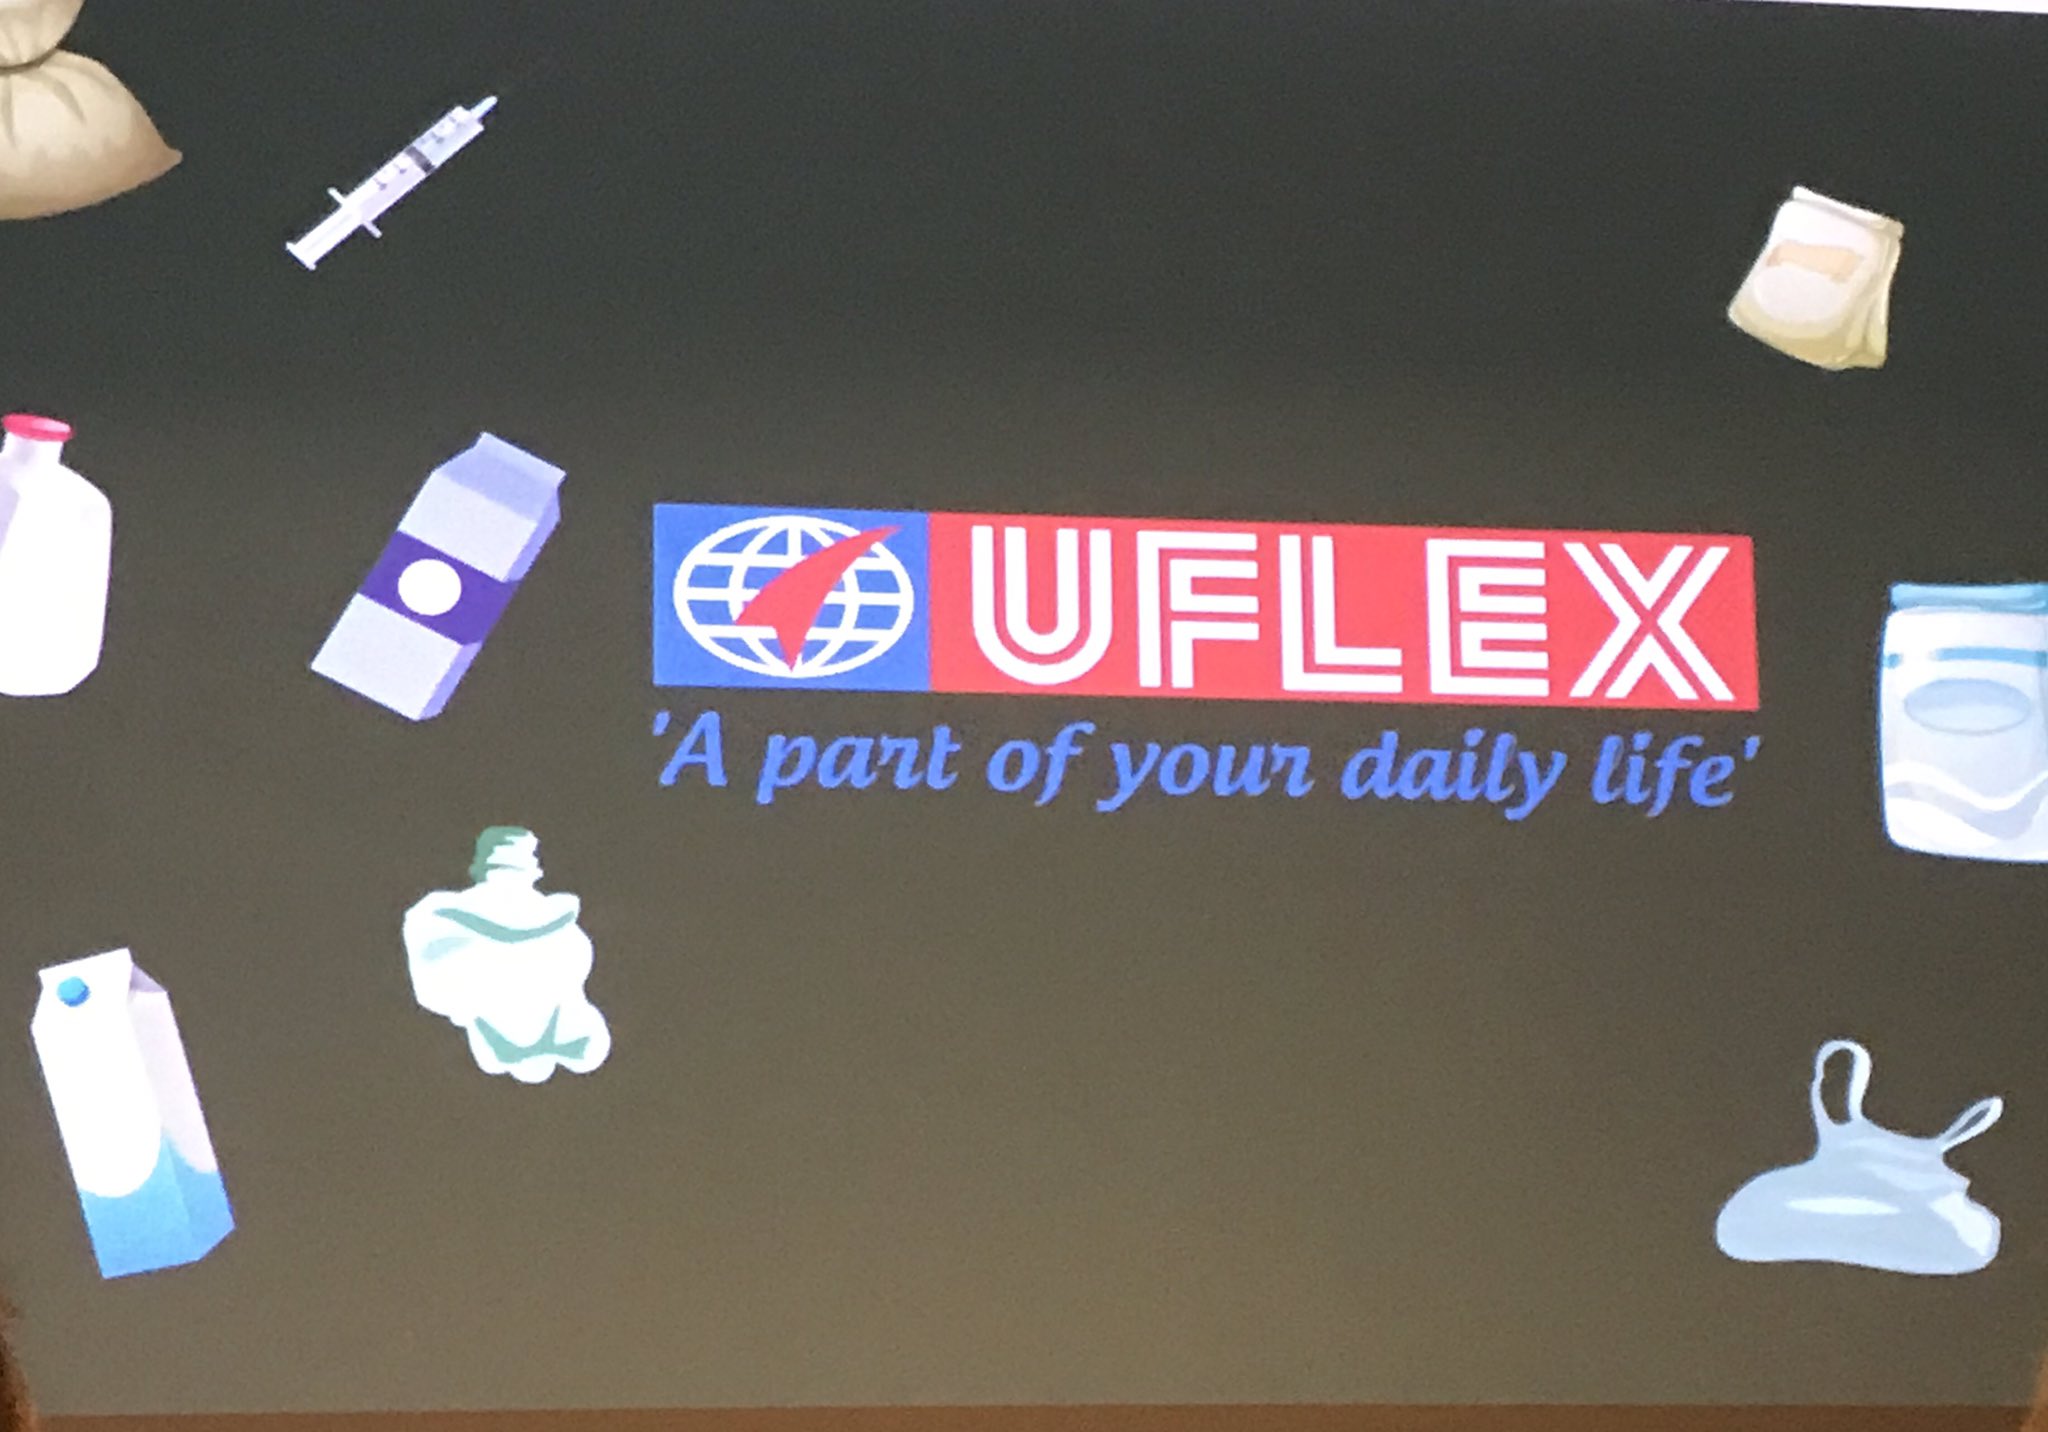 Uflex Q1 Net Profit Jumps Over Two Fold To Rs 196 54 Cr Business